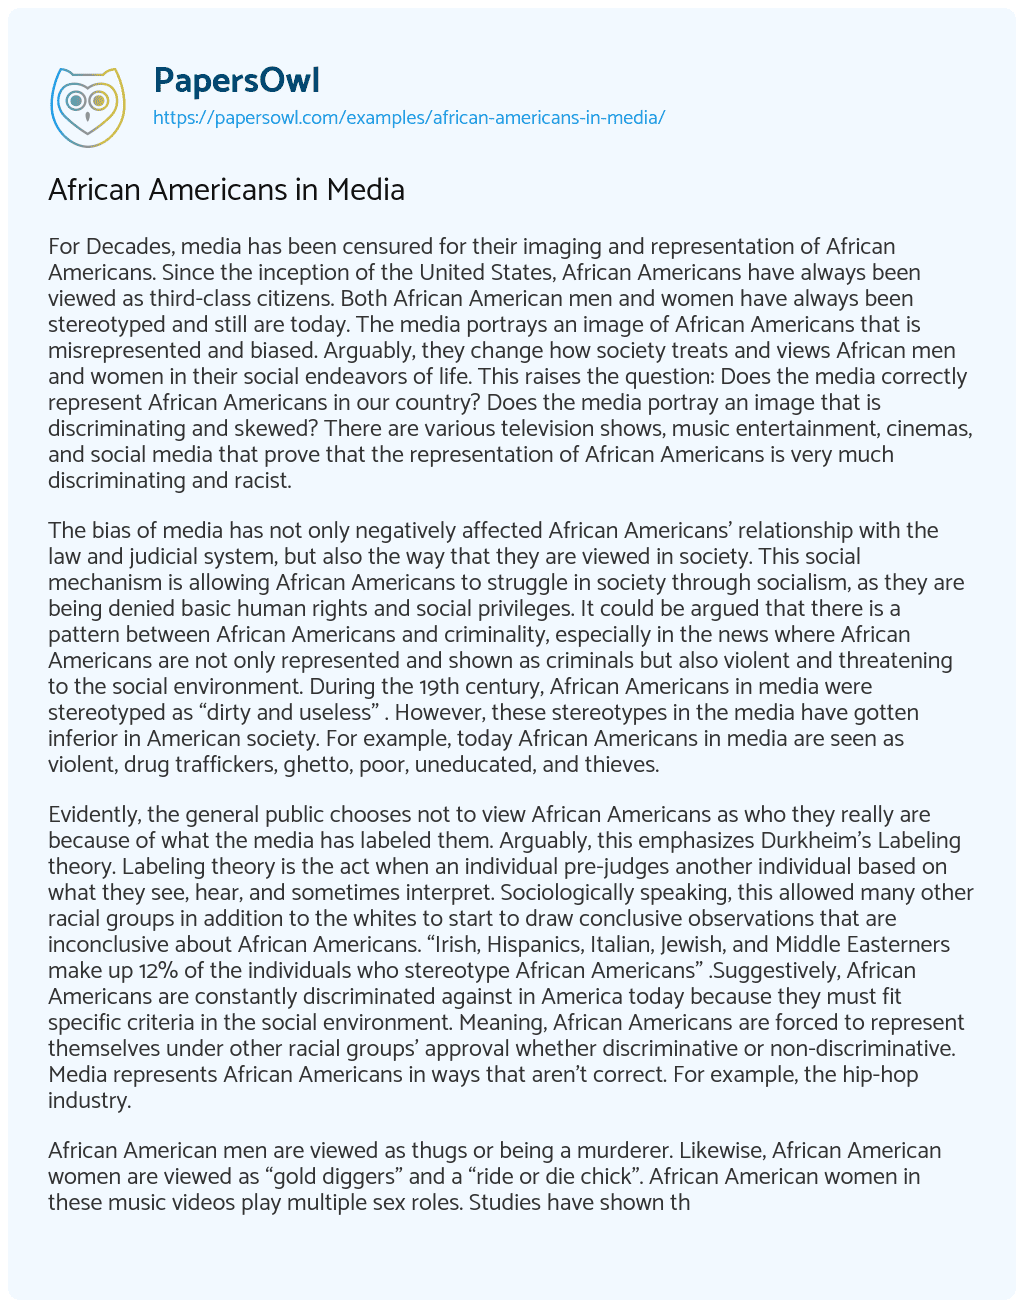 Essay on African Americans in Media